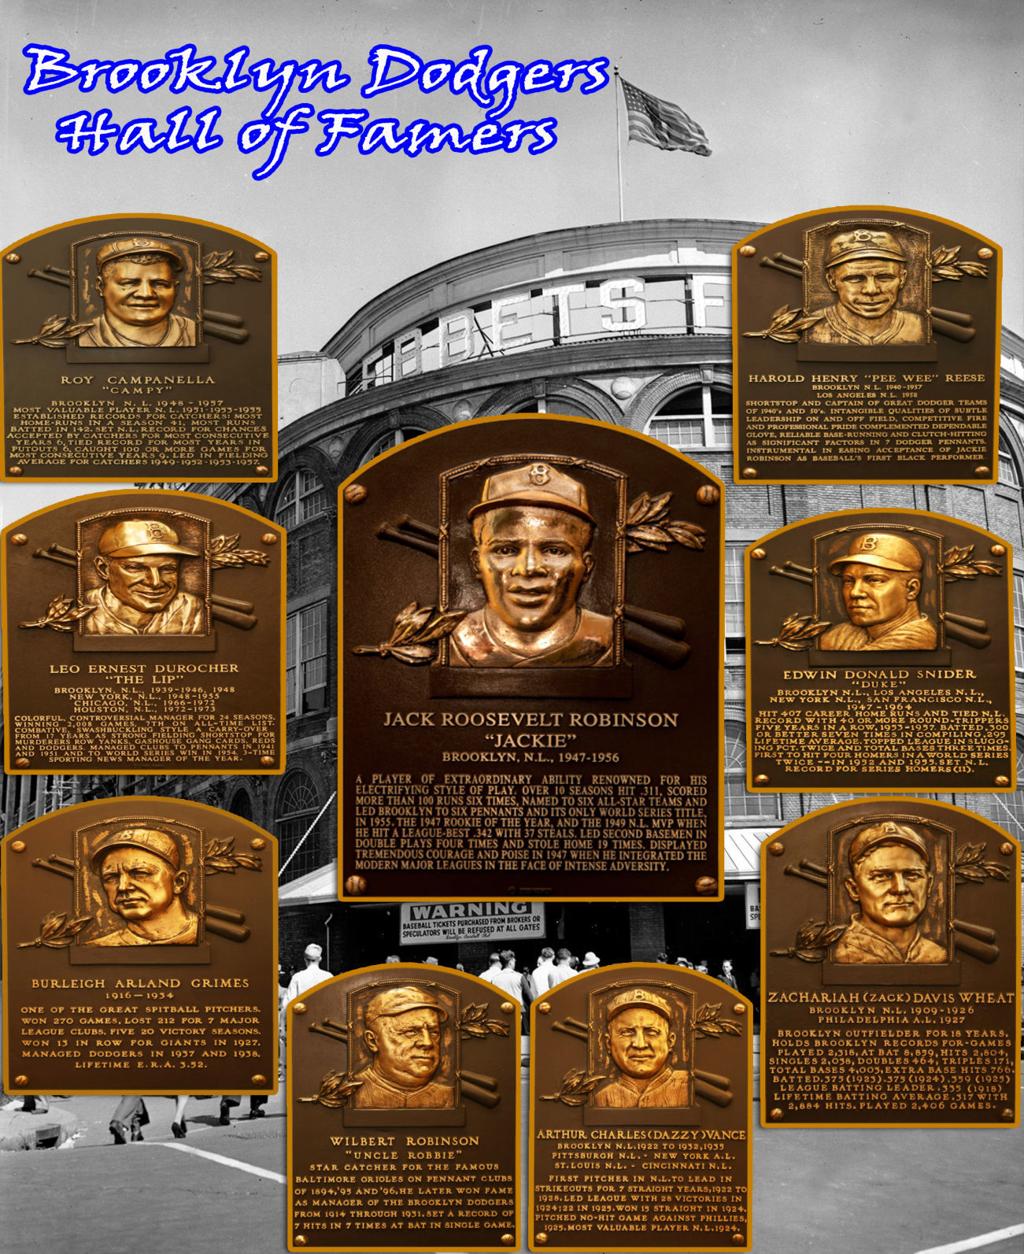 Walter O'Malley : Dodger History : Hall of Famers : Players : Roy Campanella